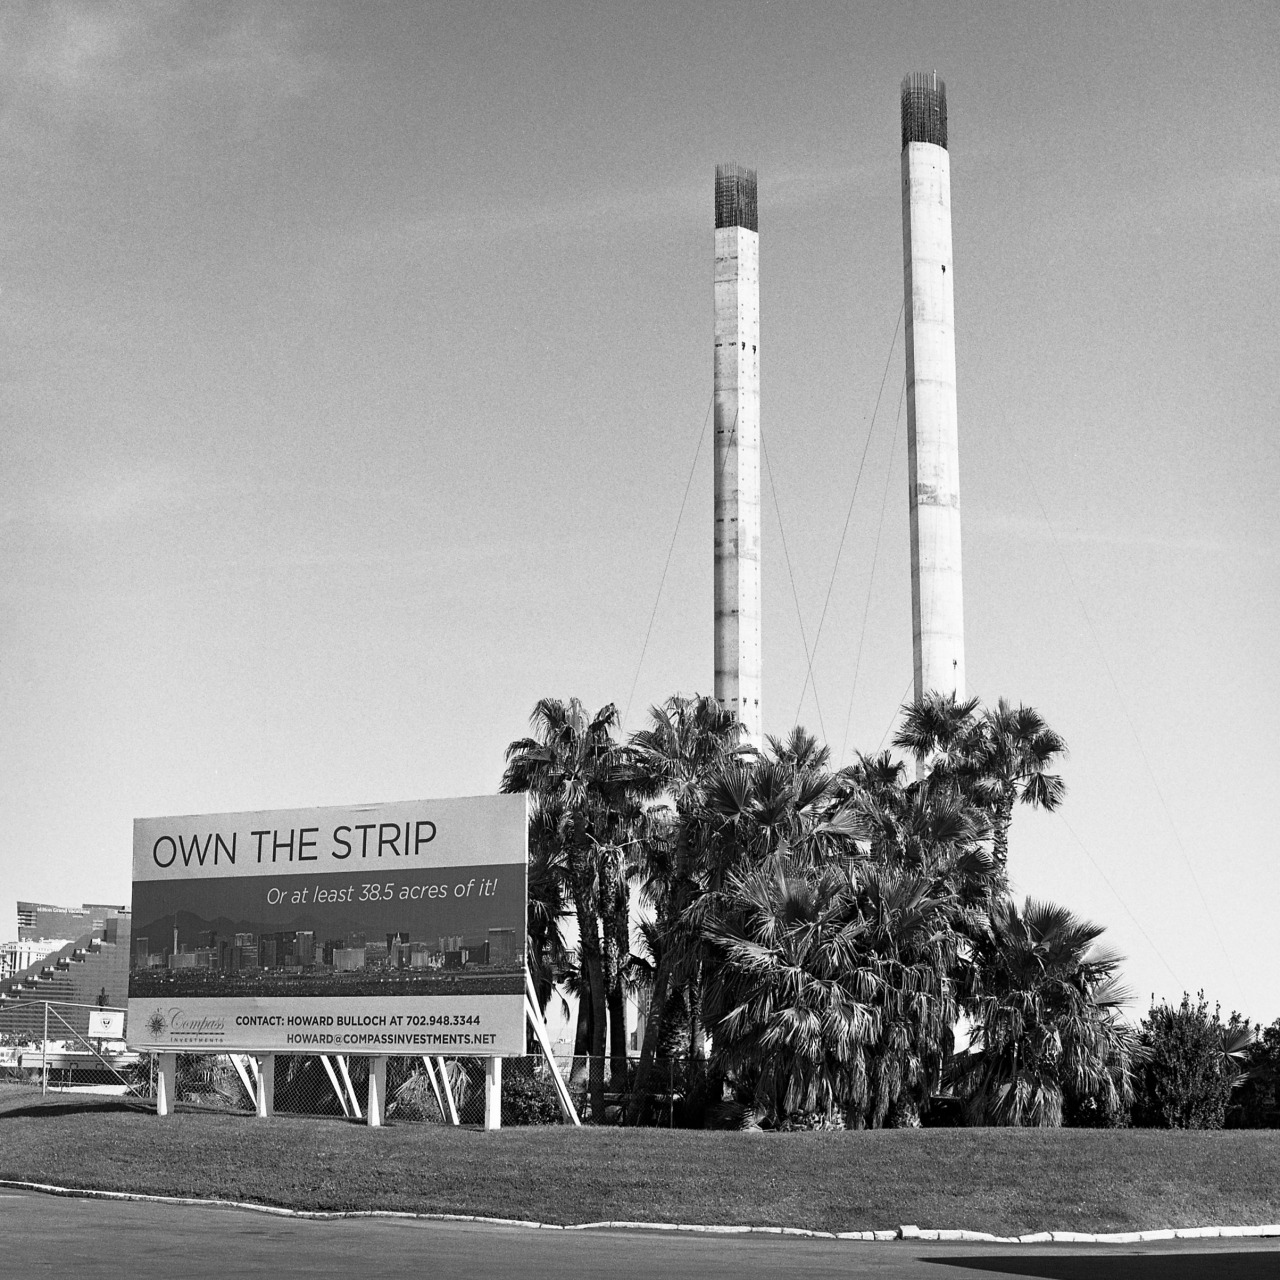 Own The Strip / Subsequent Failed ProjectsNevadaAbandoned WestHasselblad 500c/mKodak Tmax 400iso #Own The Strip  #Subsequent Failed Projects #Abandoned West#Nevada#abandoned nevada#abandoned#abandoned buildings#abandoned places#photo#photography #photographers on tumblr #original photographers#photographers directory#photographerslife#photographer#film photography #film is not dead #film#kodak#Las Vegas#Vegas#the strip#urbex#Urban Decay#urban exploration #on the road